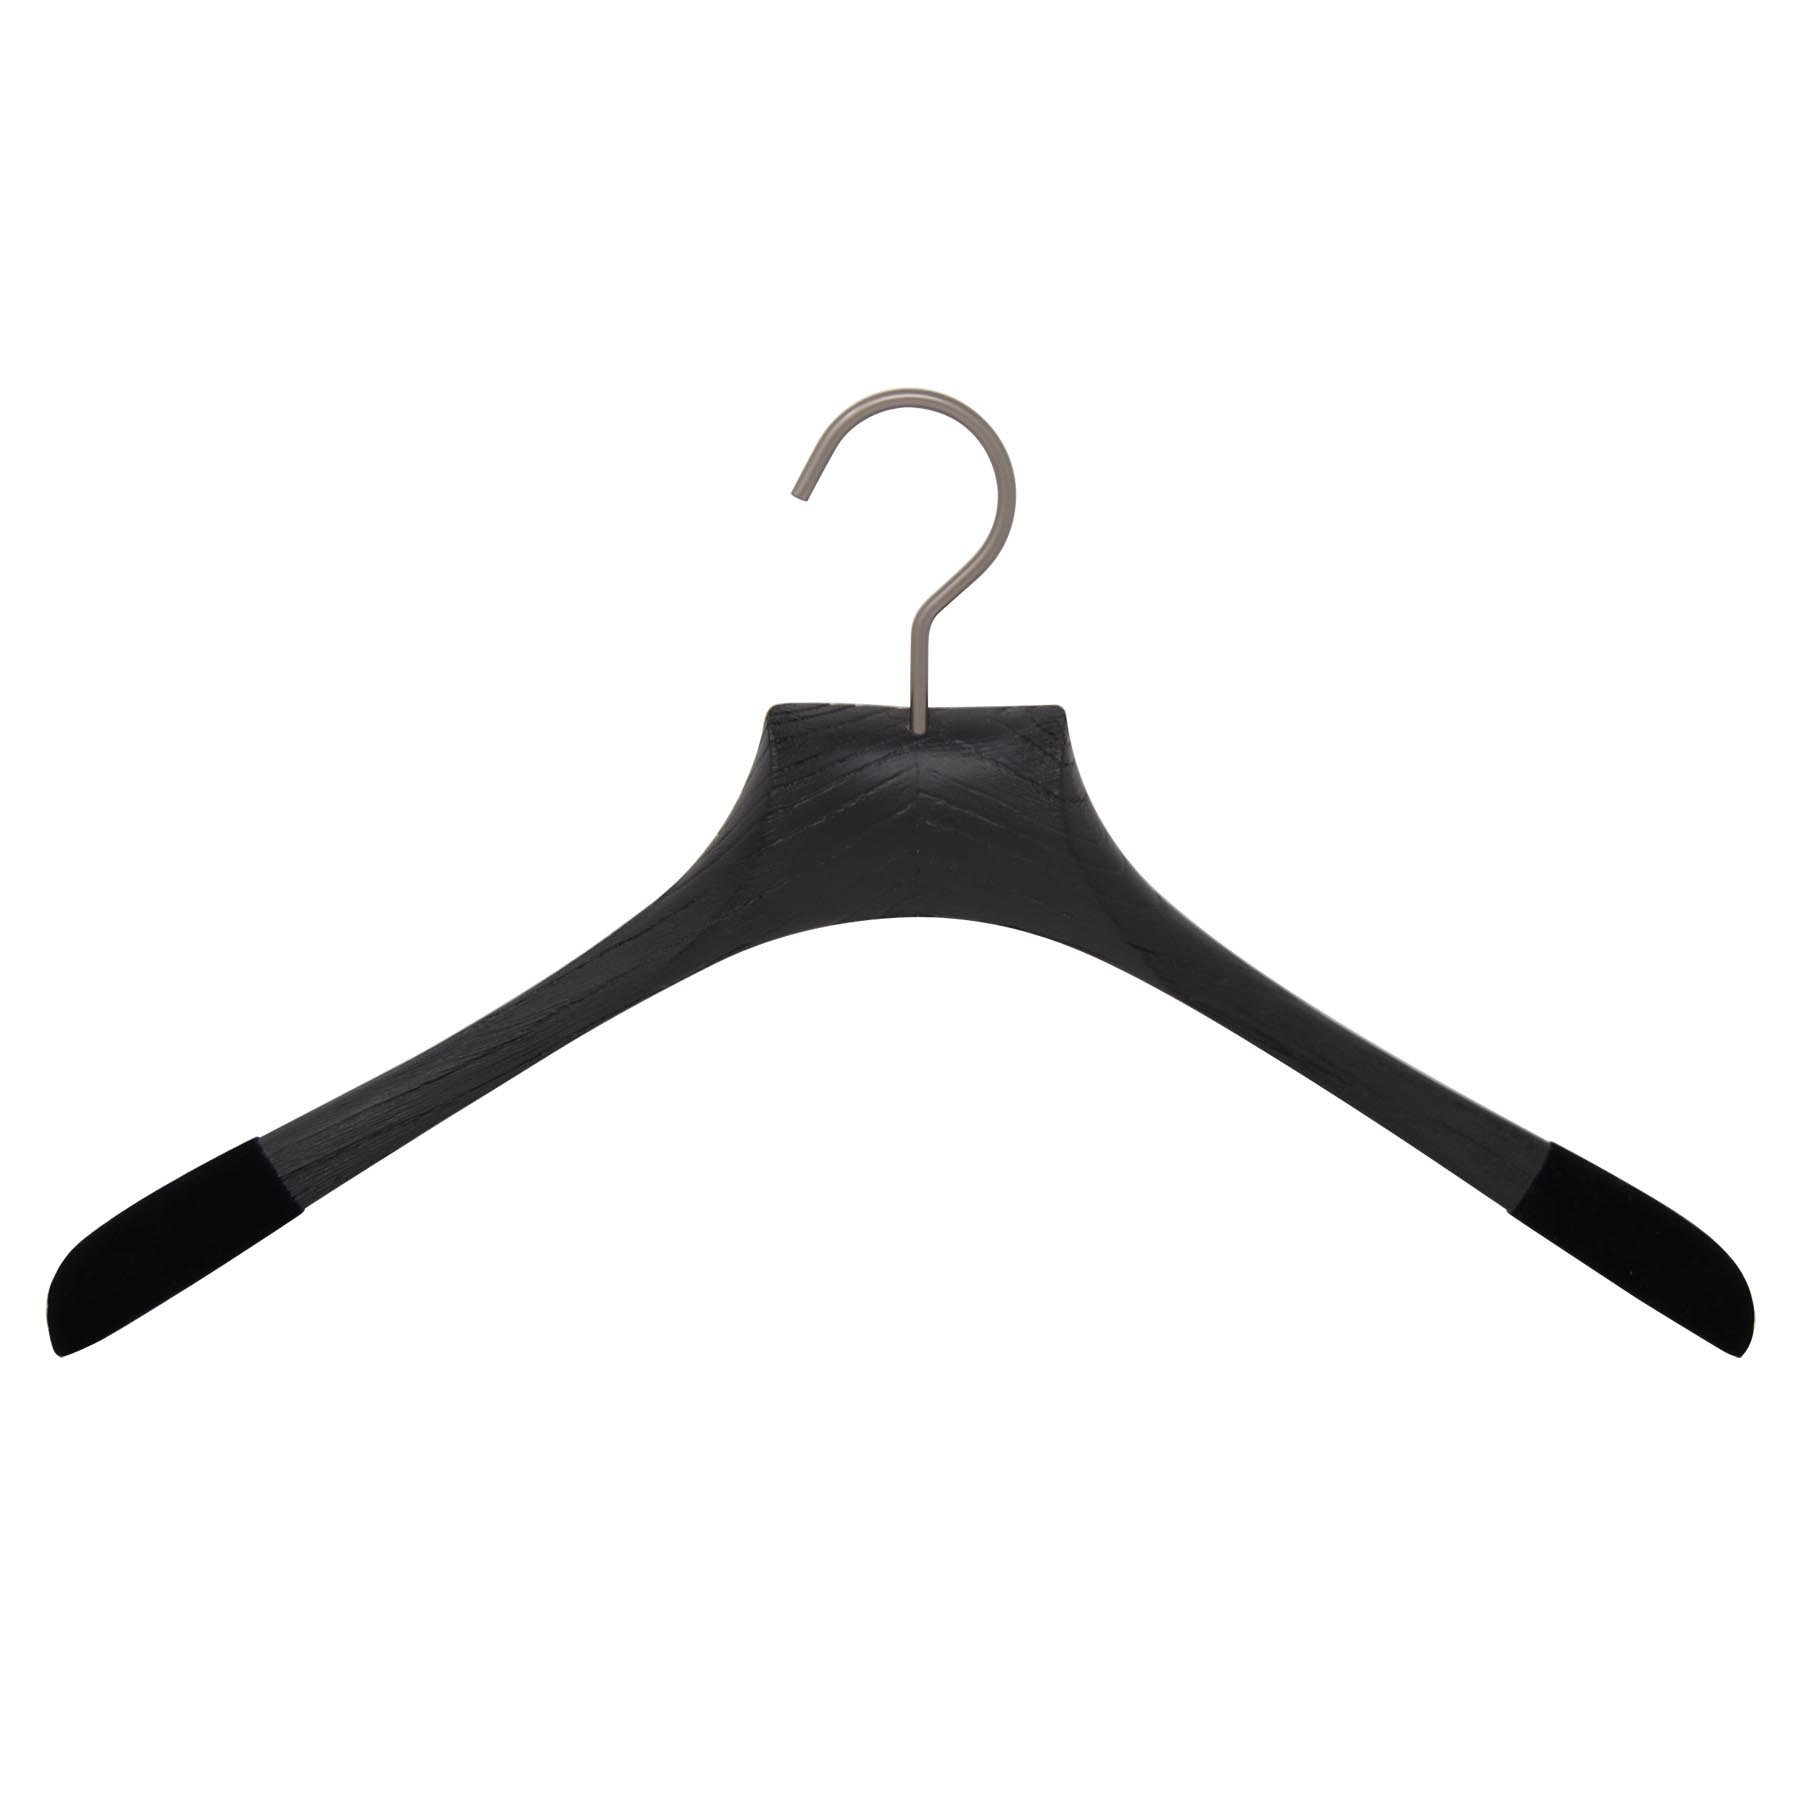 10 hangers for shirts in ash wood - Black brushed color